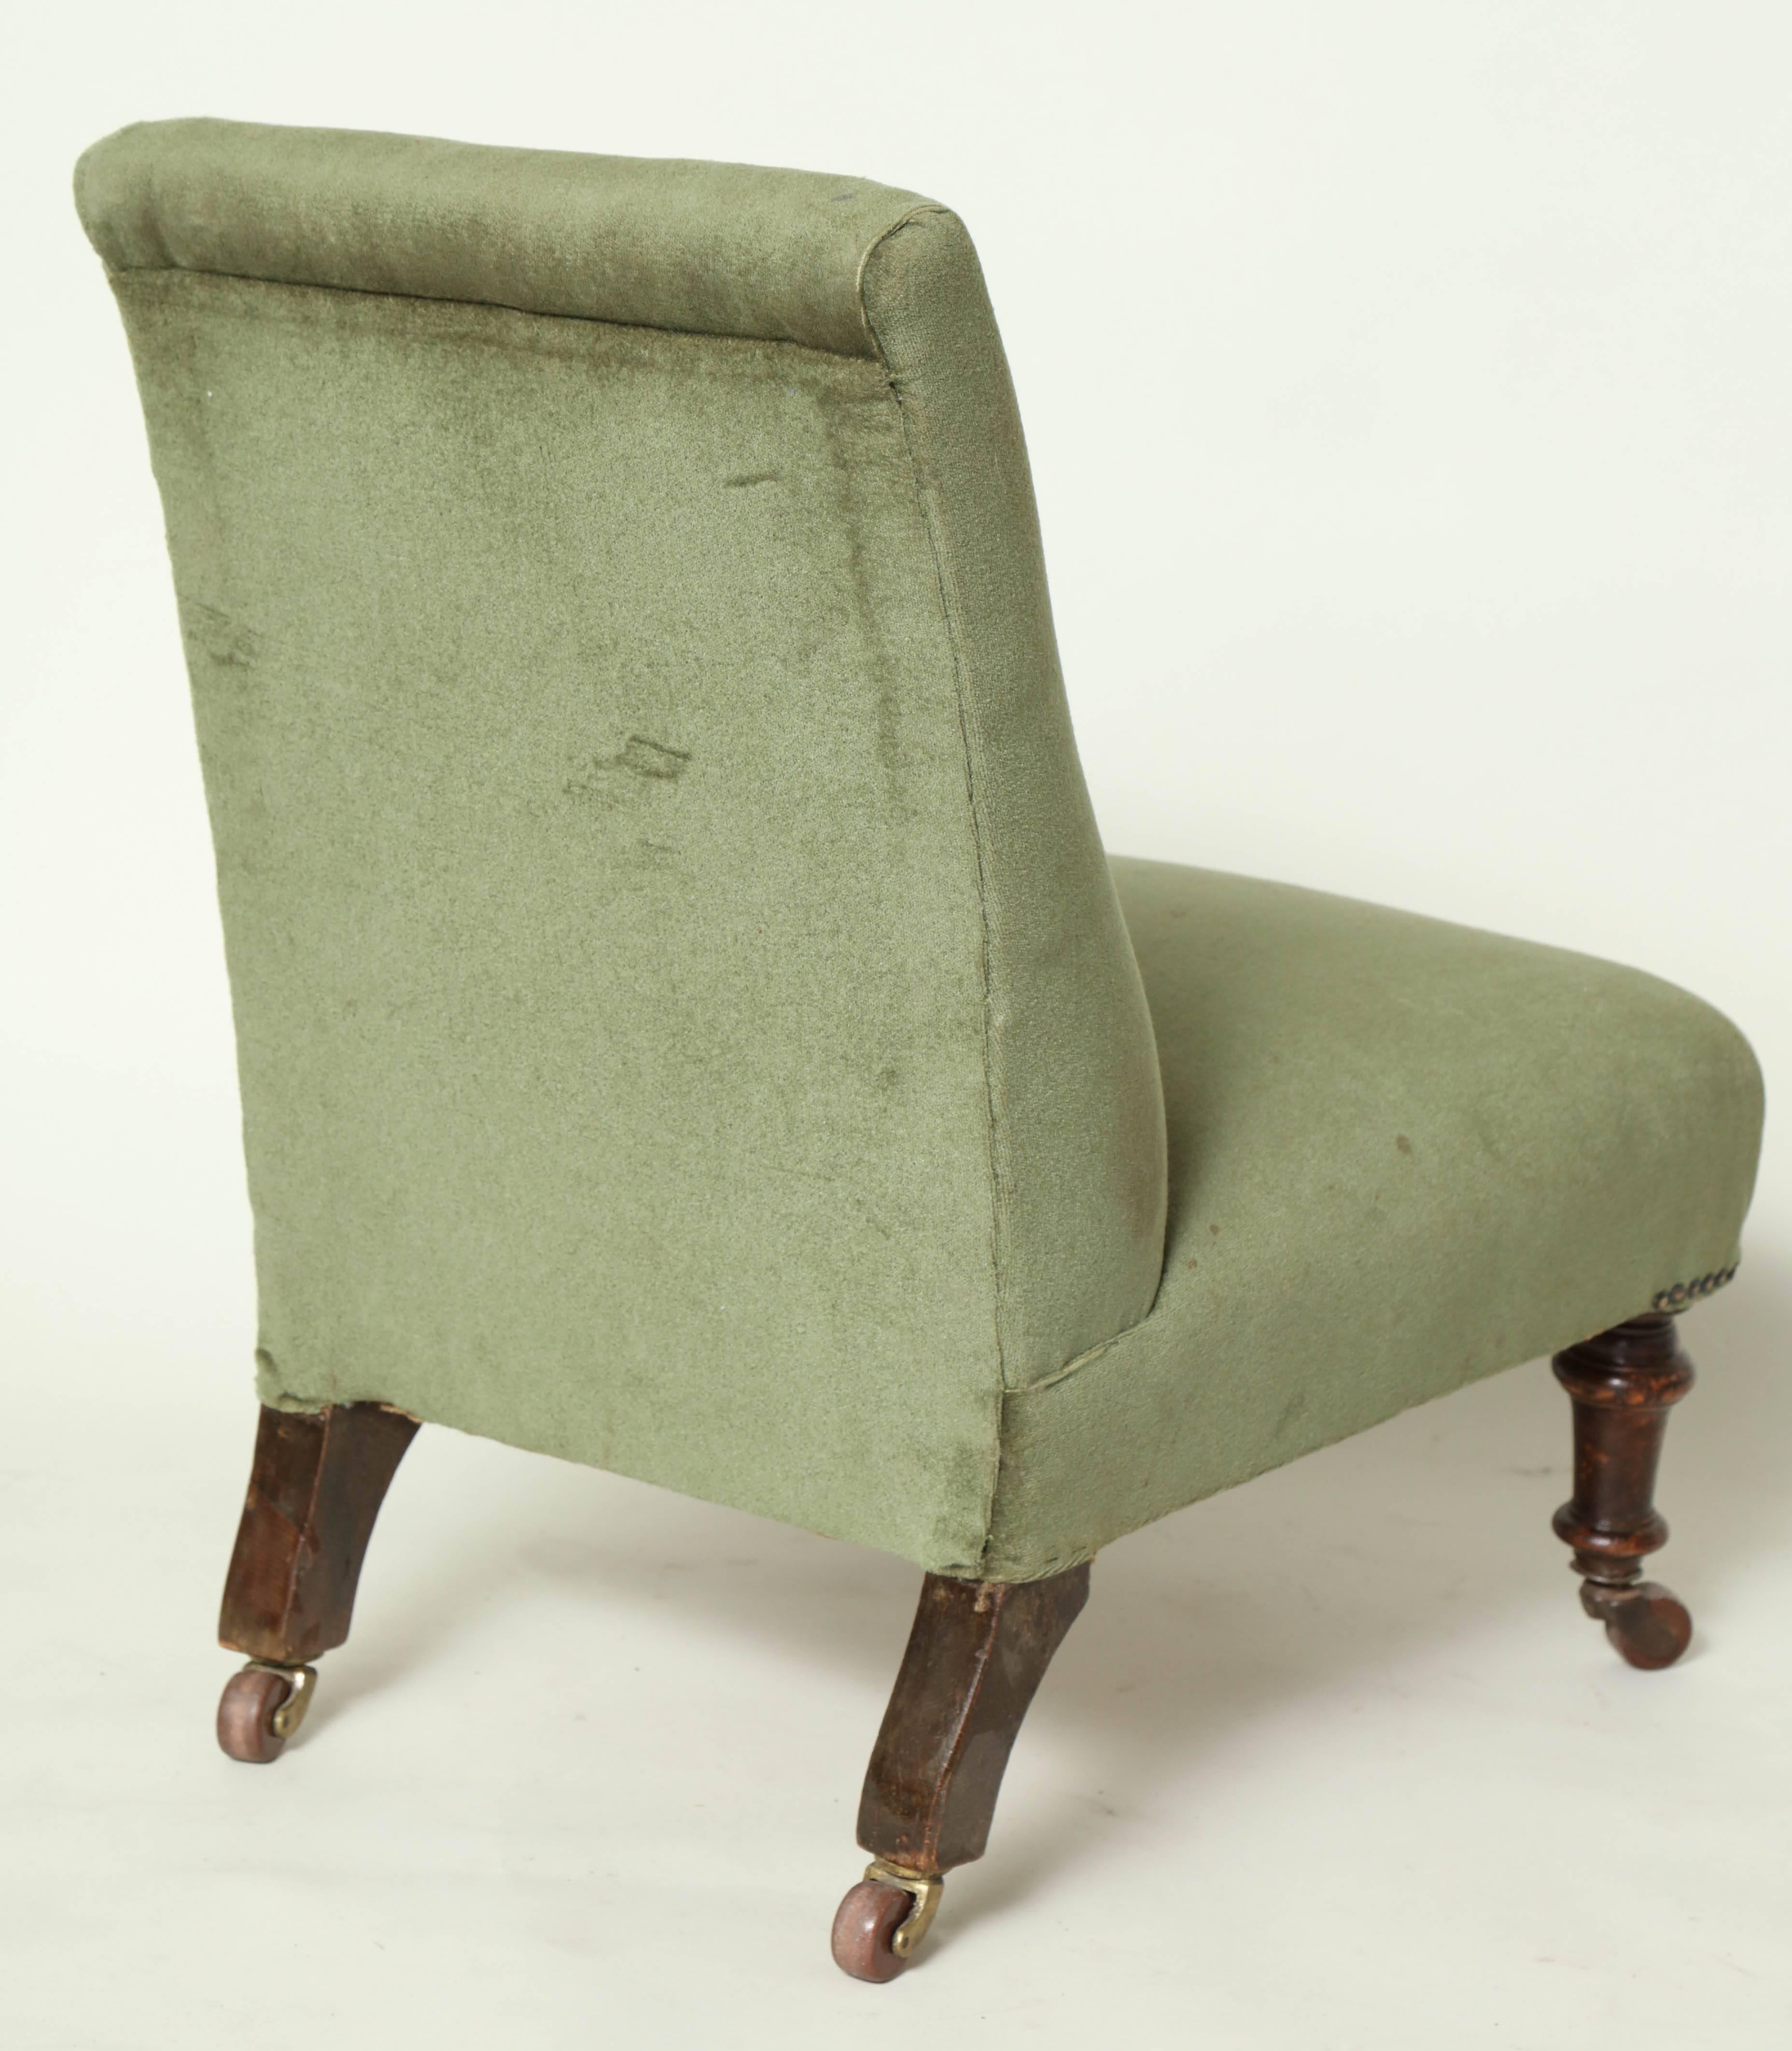 Late 19th Century Edwardian Upholstered Slipper Chair